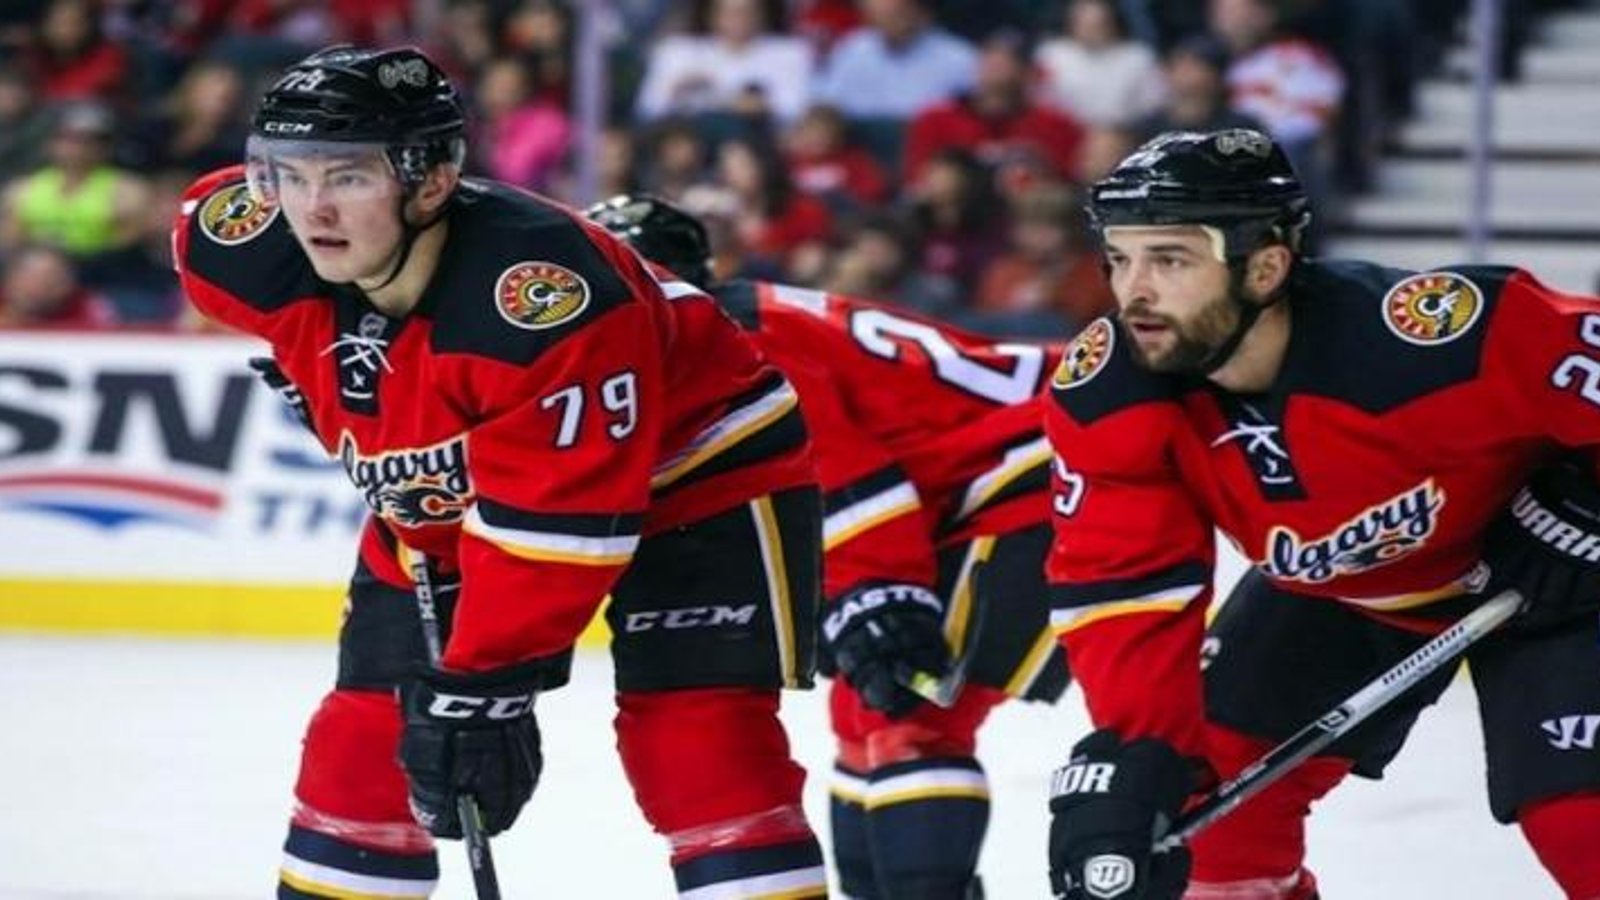 Young player will have great opportunity on Flames' top line.